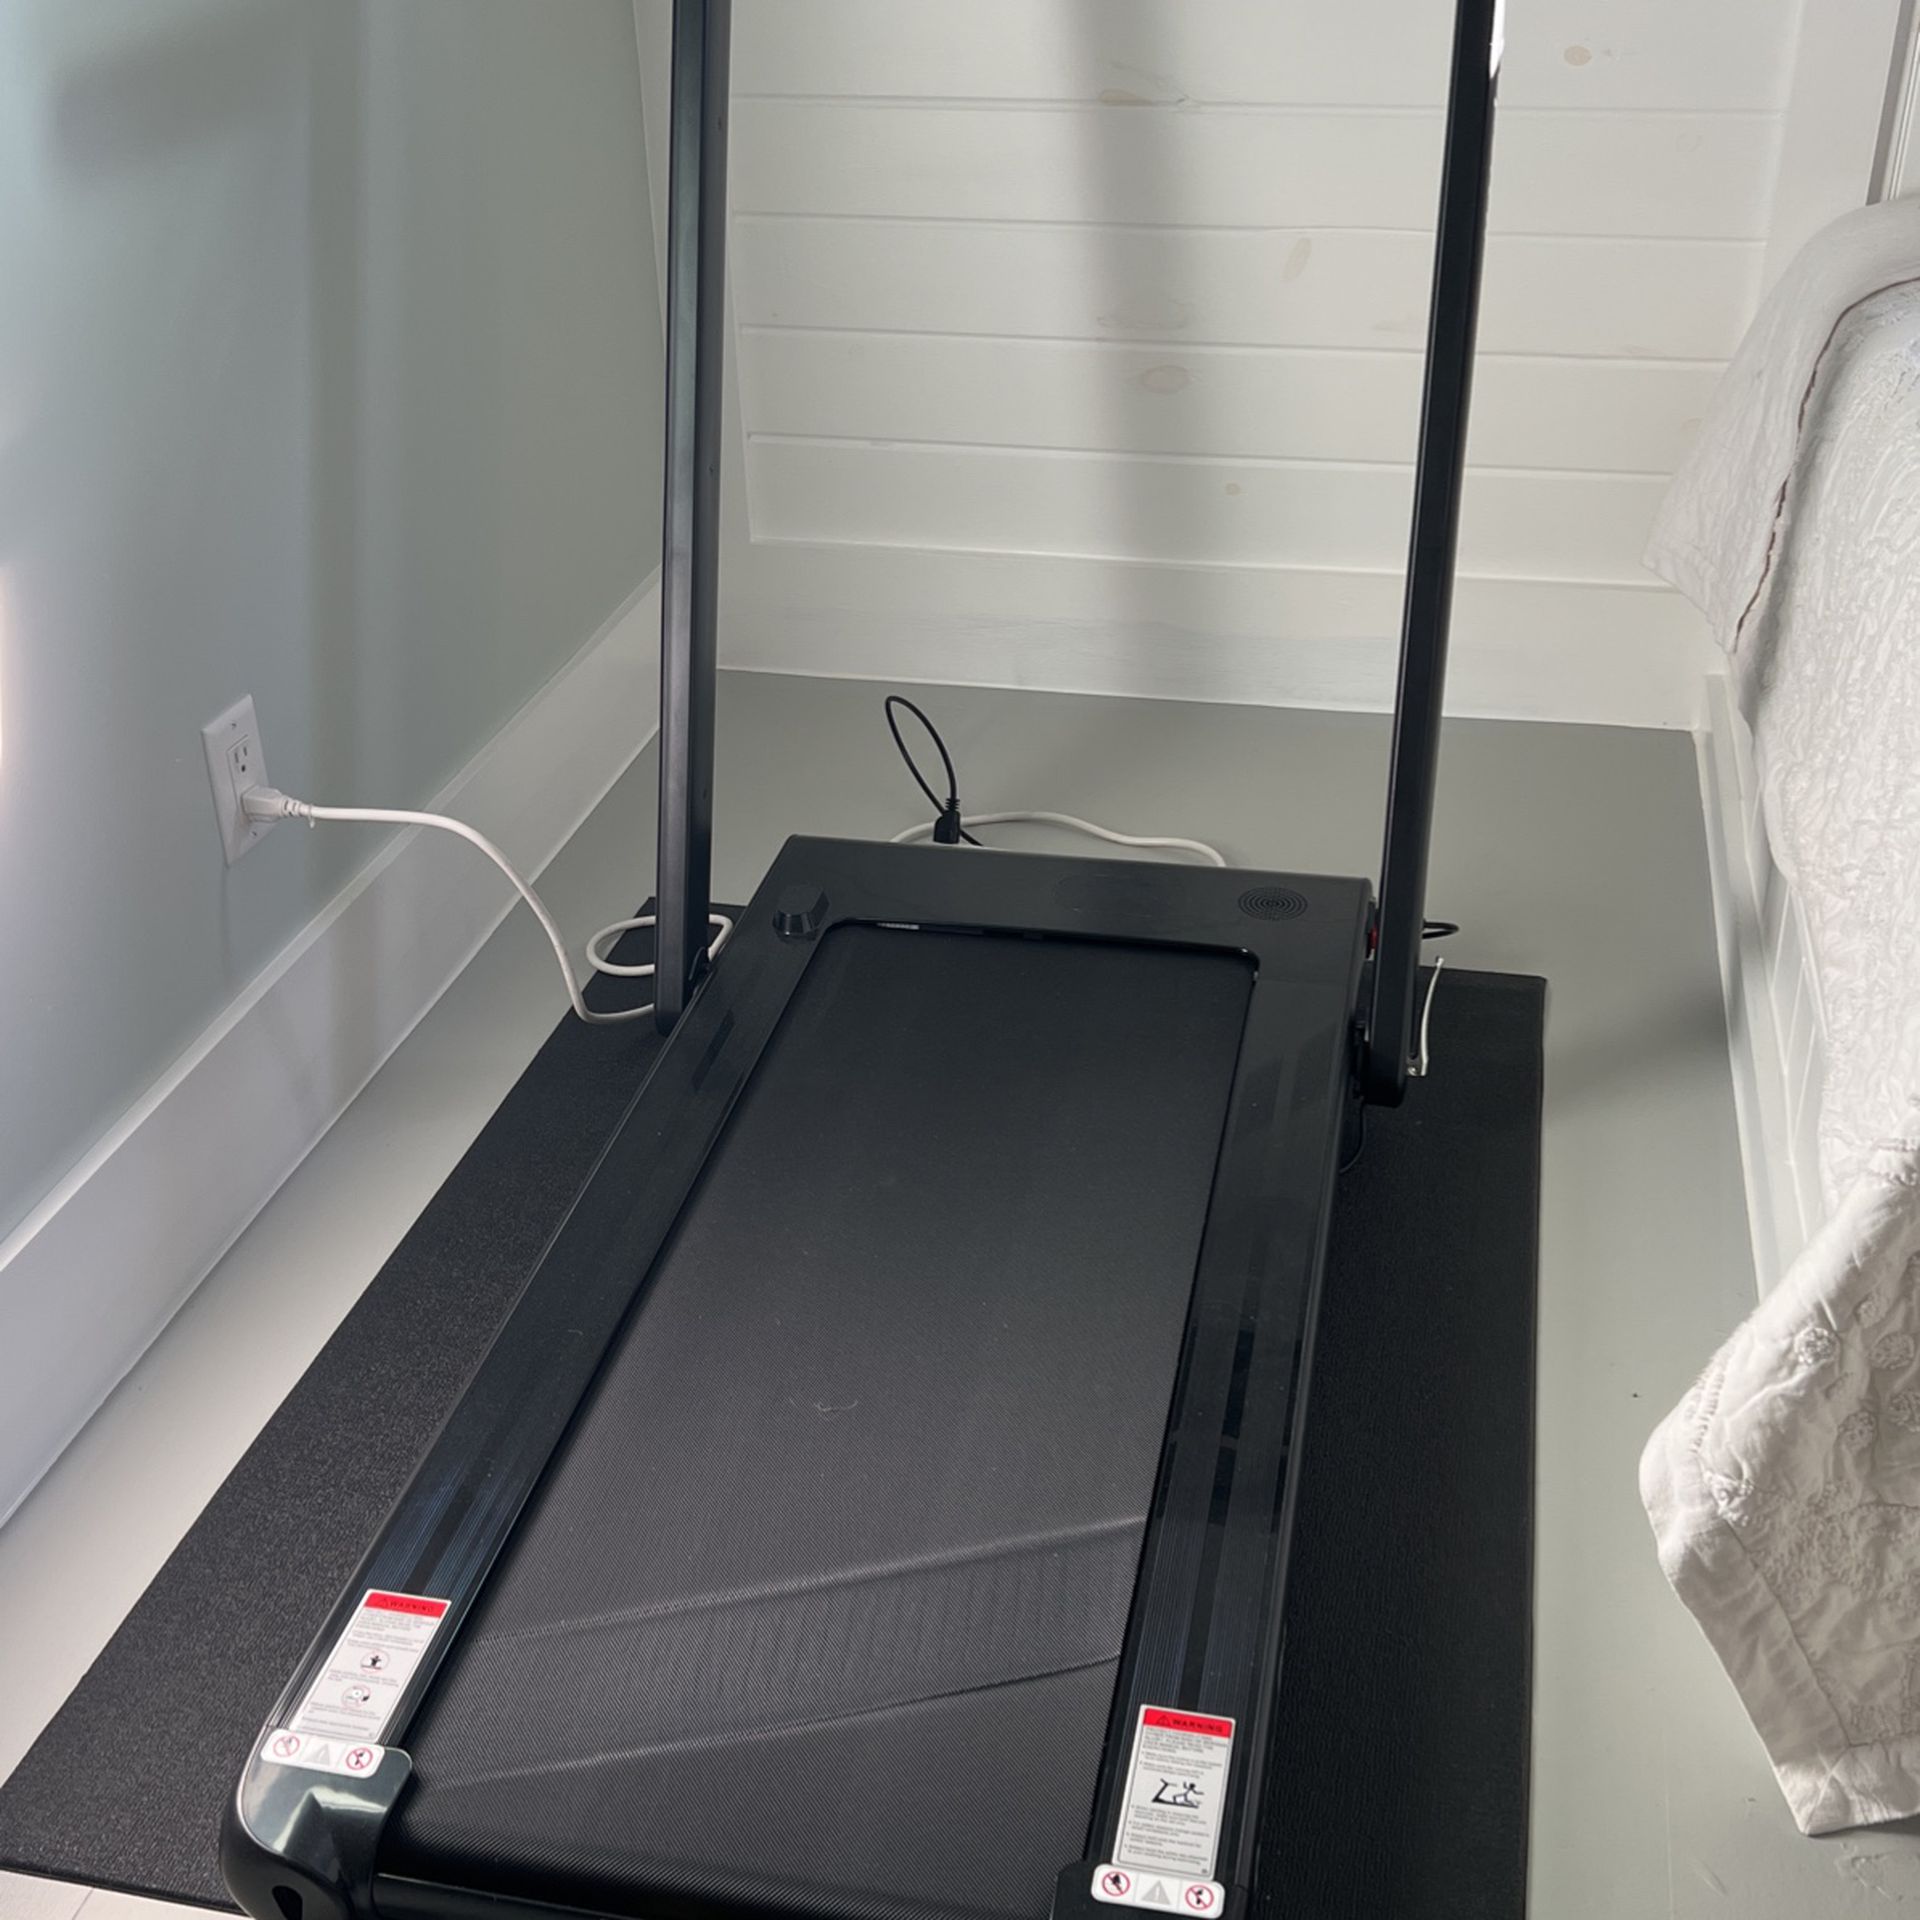 GoPlus Treadmill Perfect For Your Home Office! 